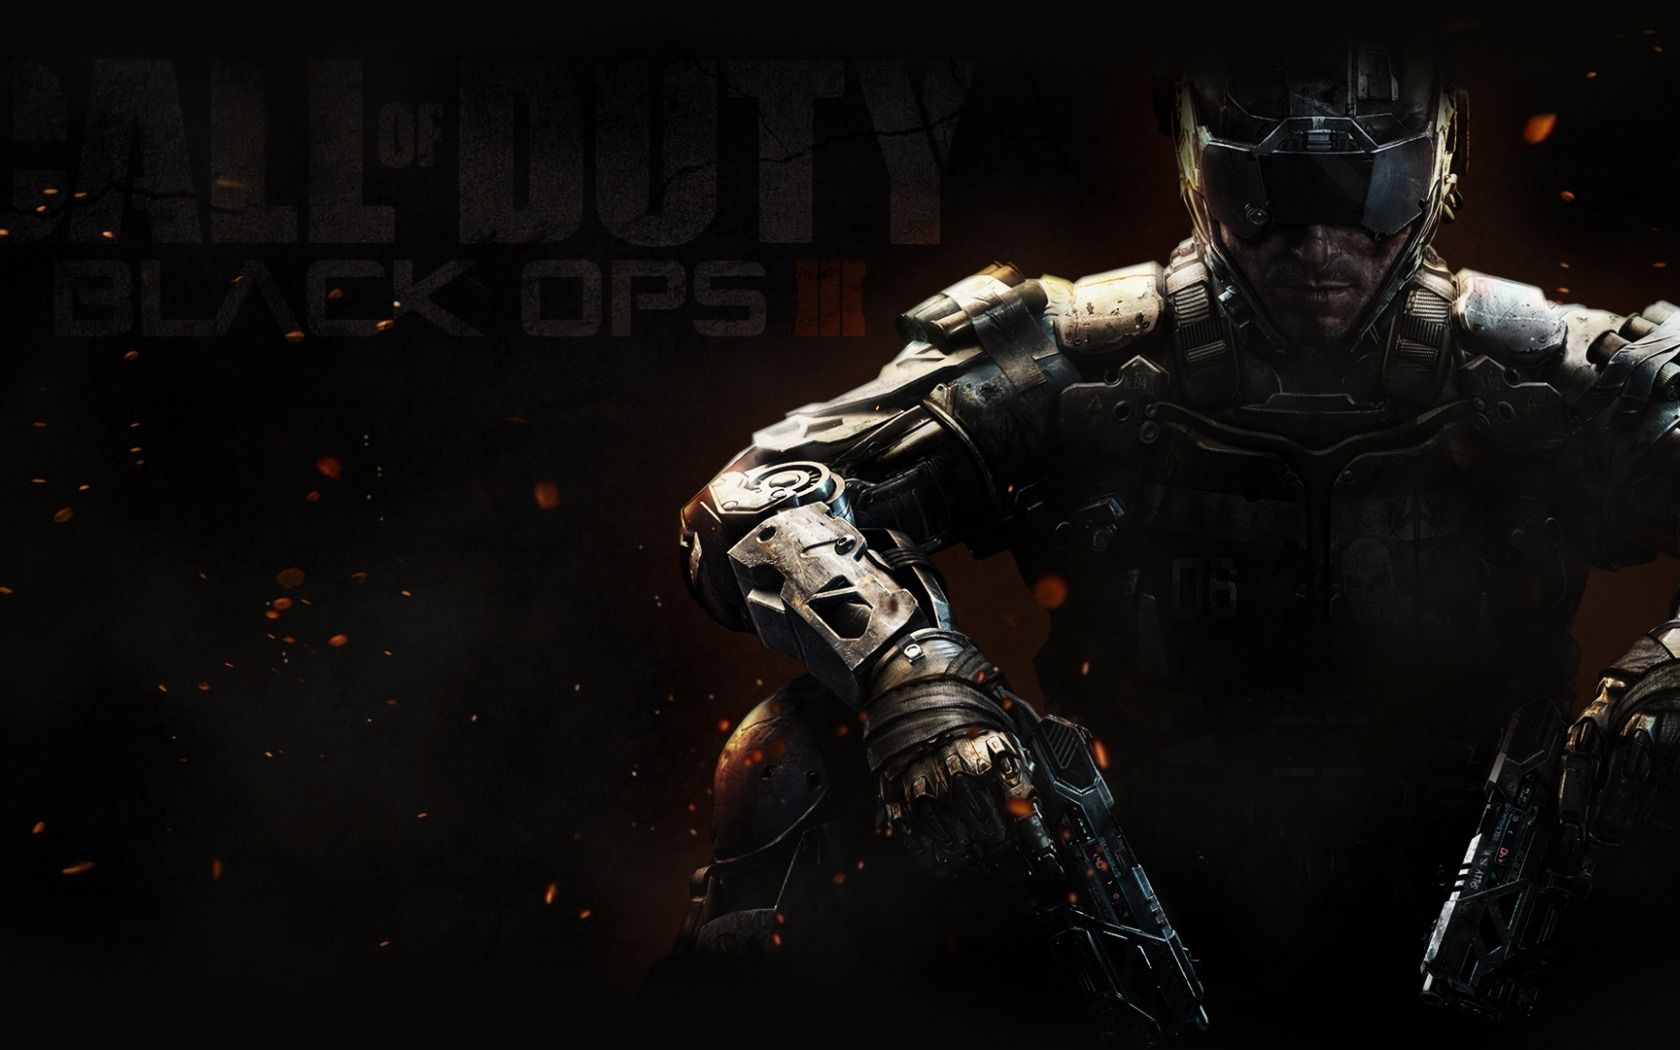 Download Wallpaper 1680x1050 Call of duty black ops 3, Call of ...